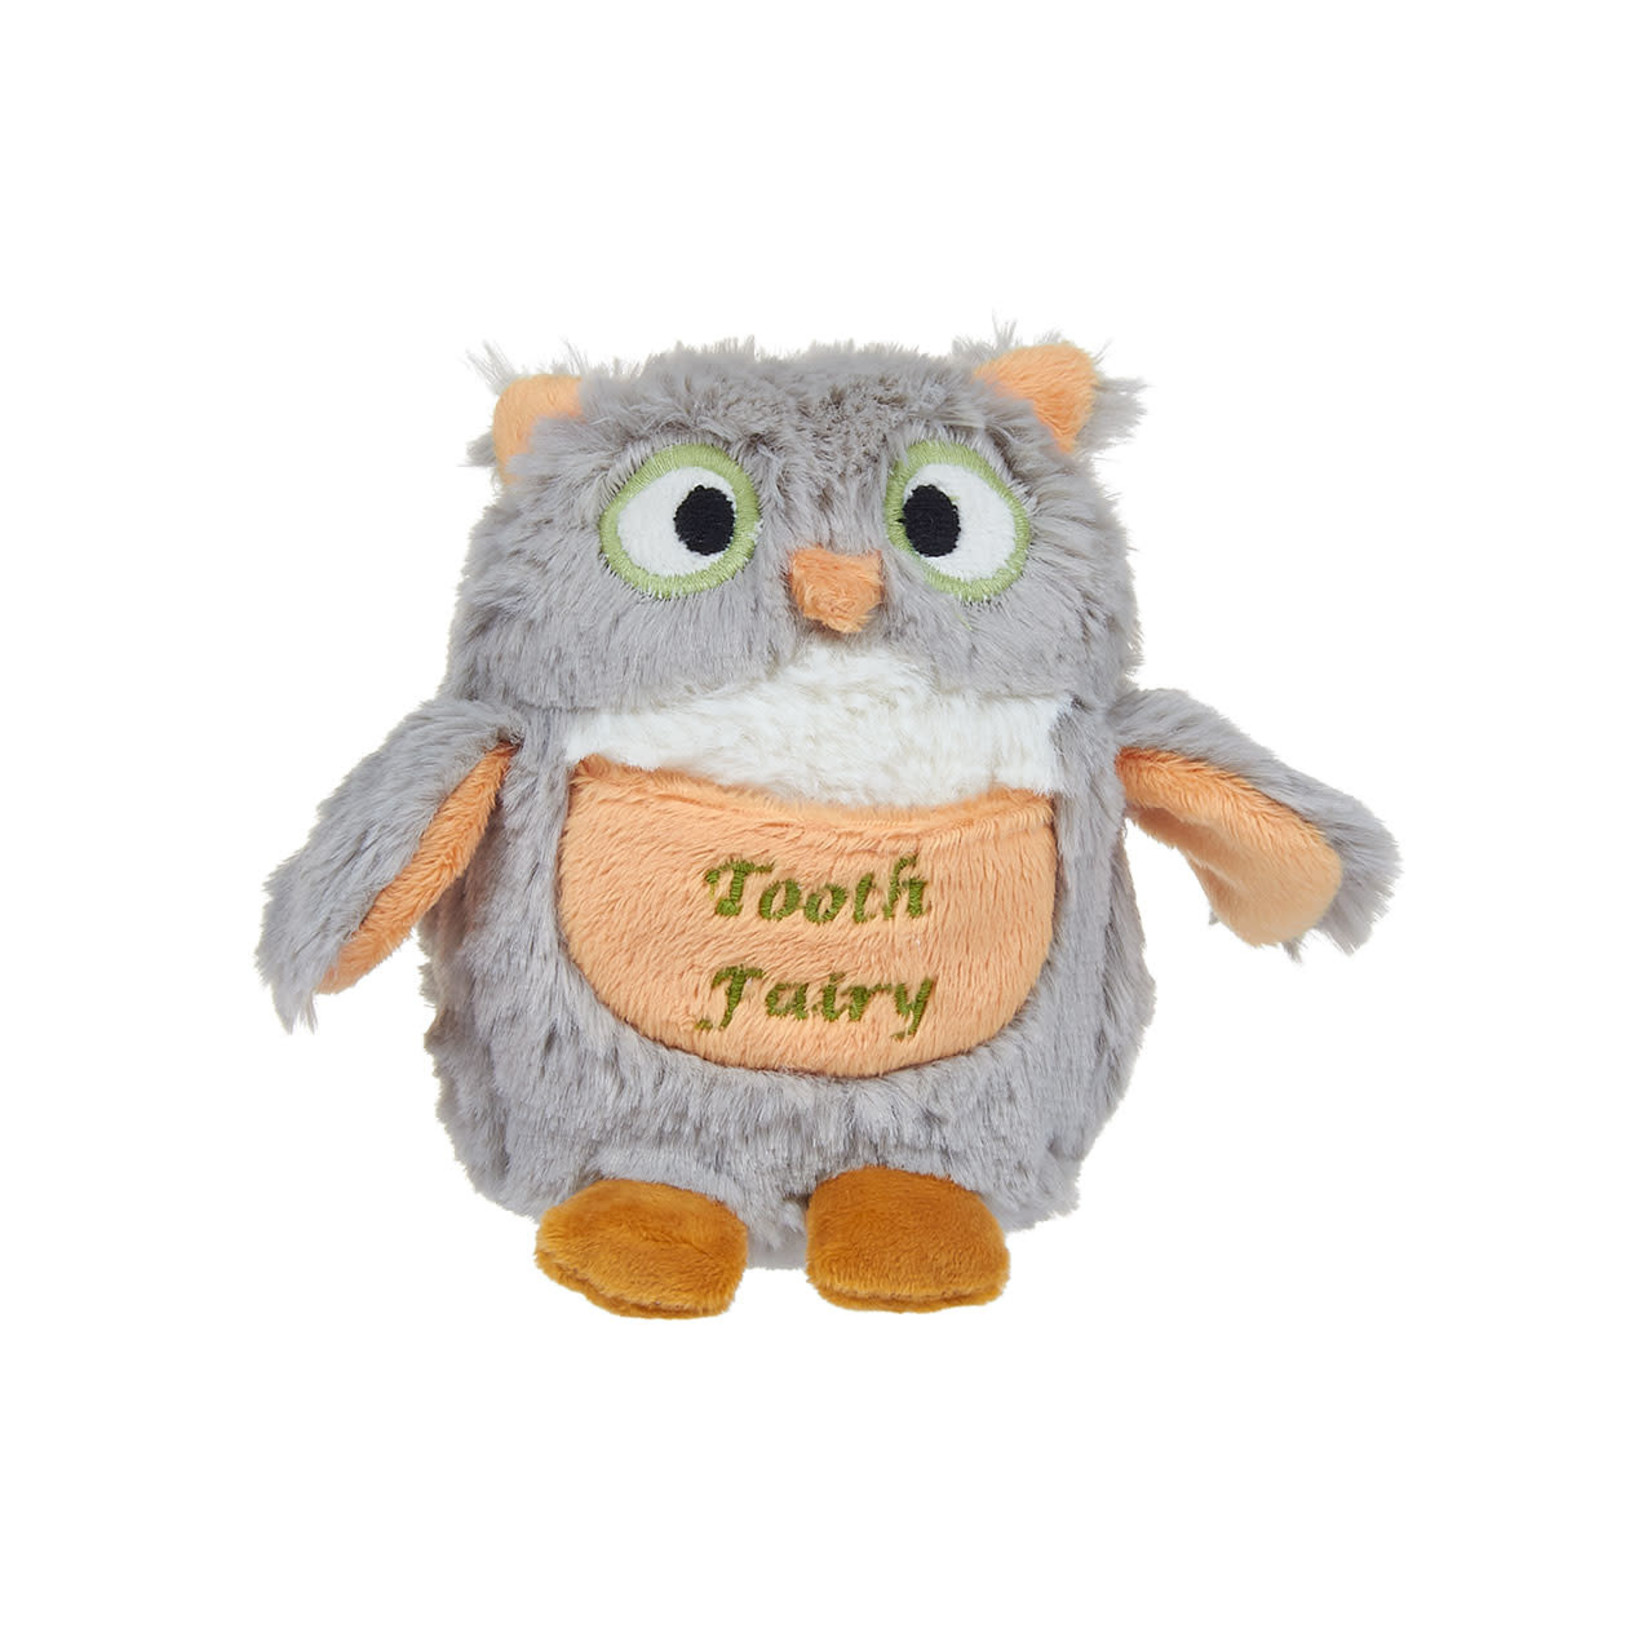 Maison Chic Tooth Fairies: Woodland  Friends